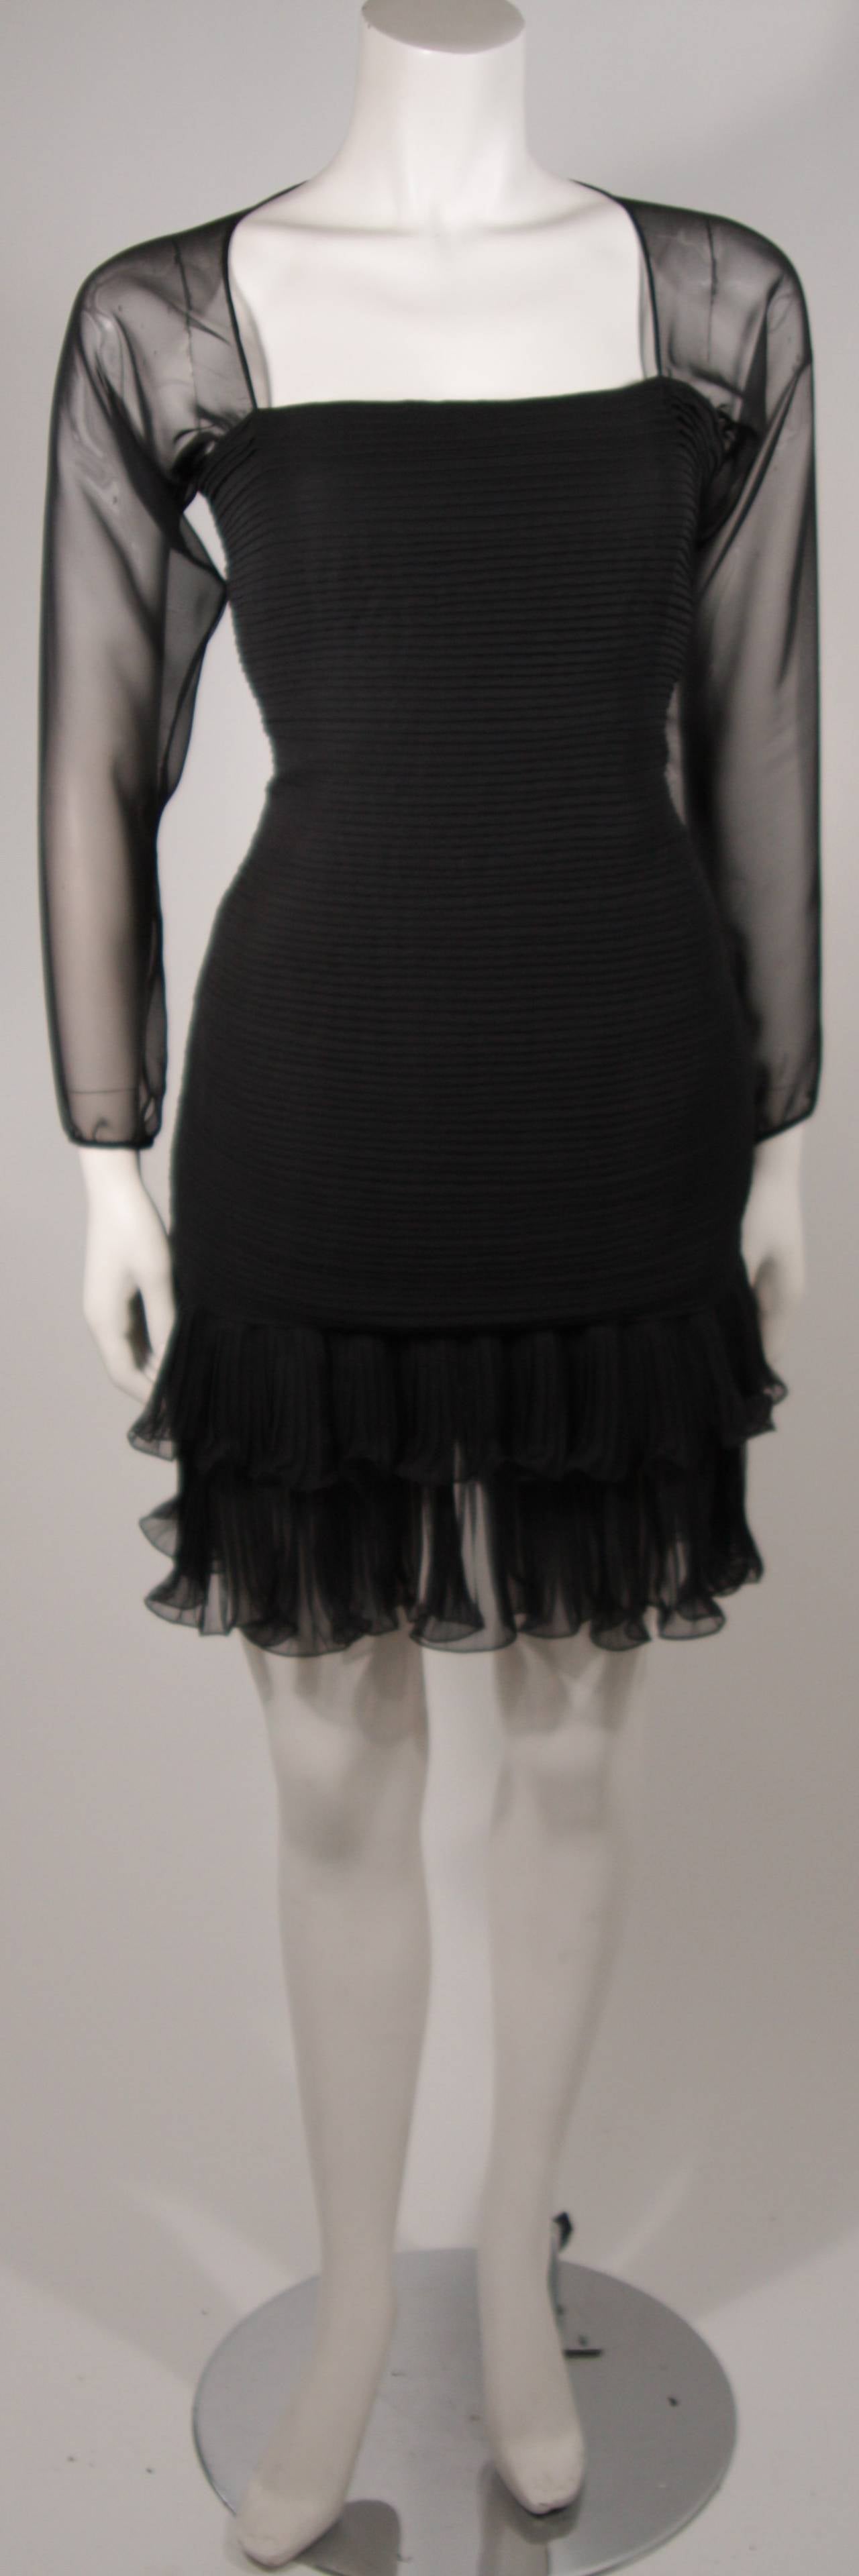 This Oscar De La Renta cocktail dress is composed of a black silk chiffon. The design features sheer sleeves, a pleated bodice, and ruffled hem . There is a zipper closure for ease of access. 

Measures (Approximately)
Size 10
Length: